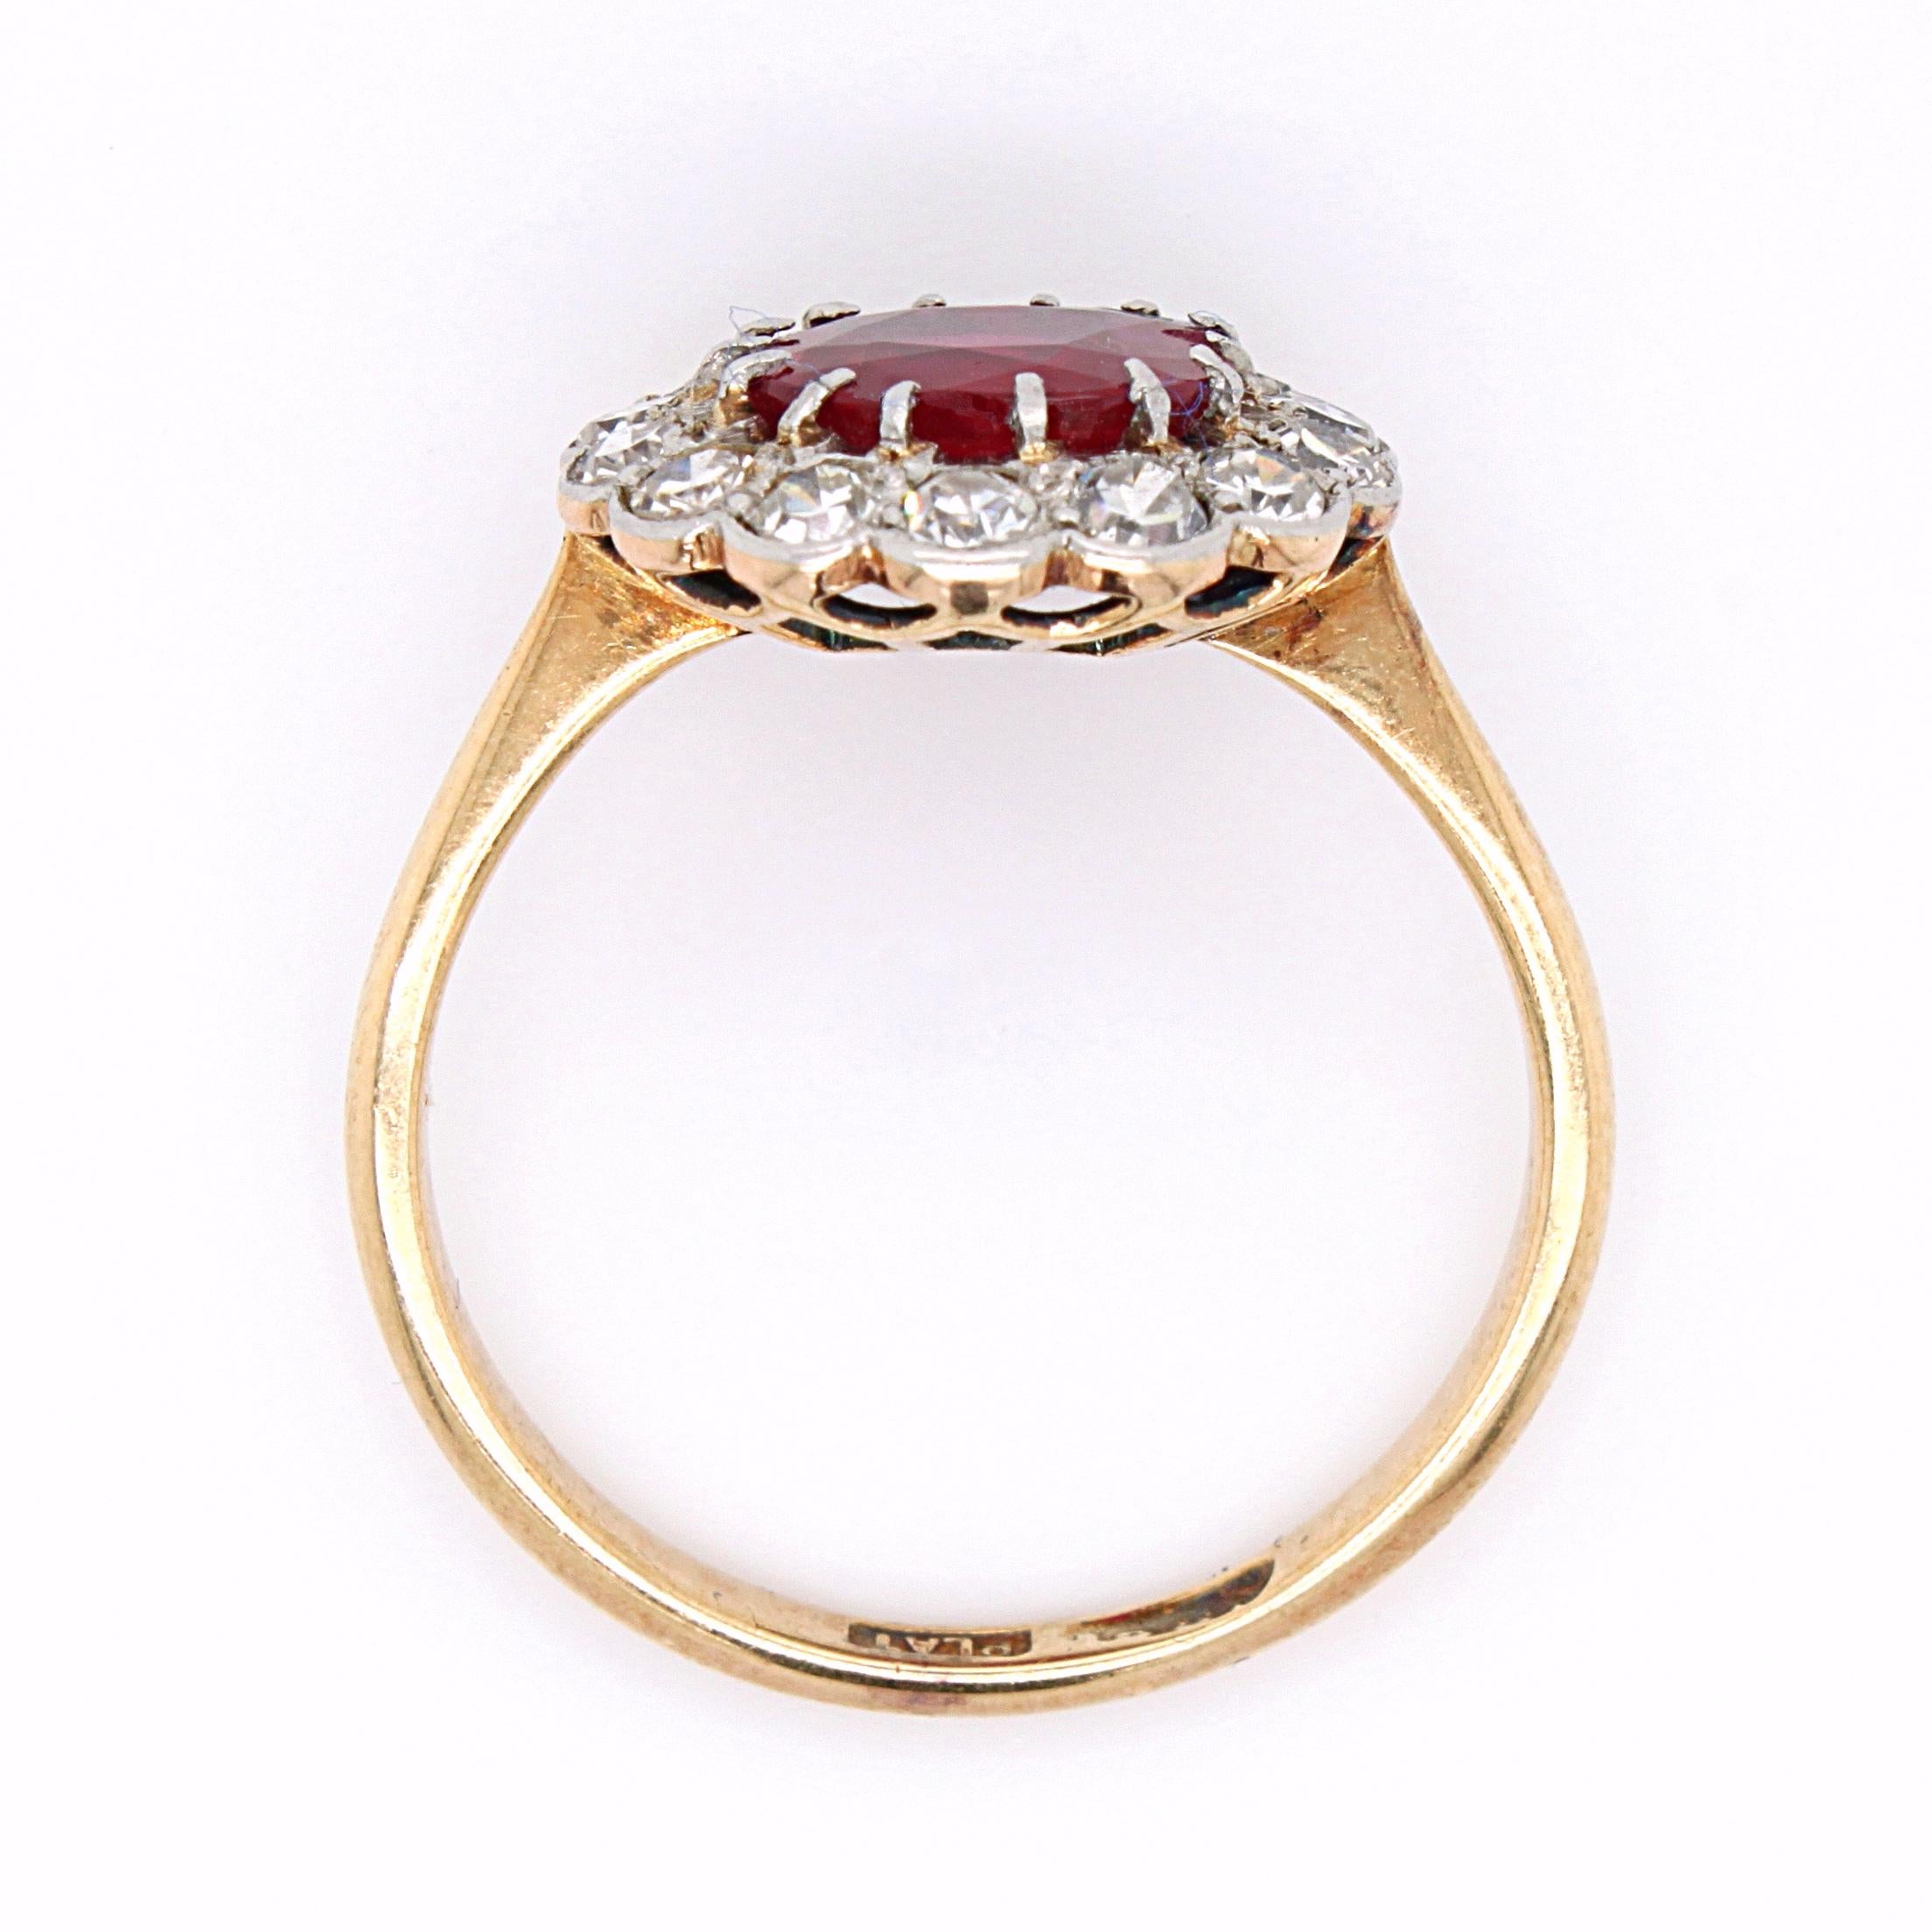 Pigeon Blood Ruby 'No Heat, Burma' and Diamond Cluster Ring, ca. 1900 In Good Condition For Sale In Idar-Oberstein, DE